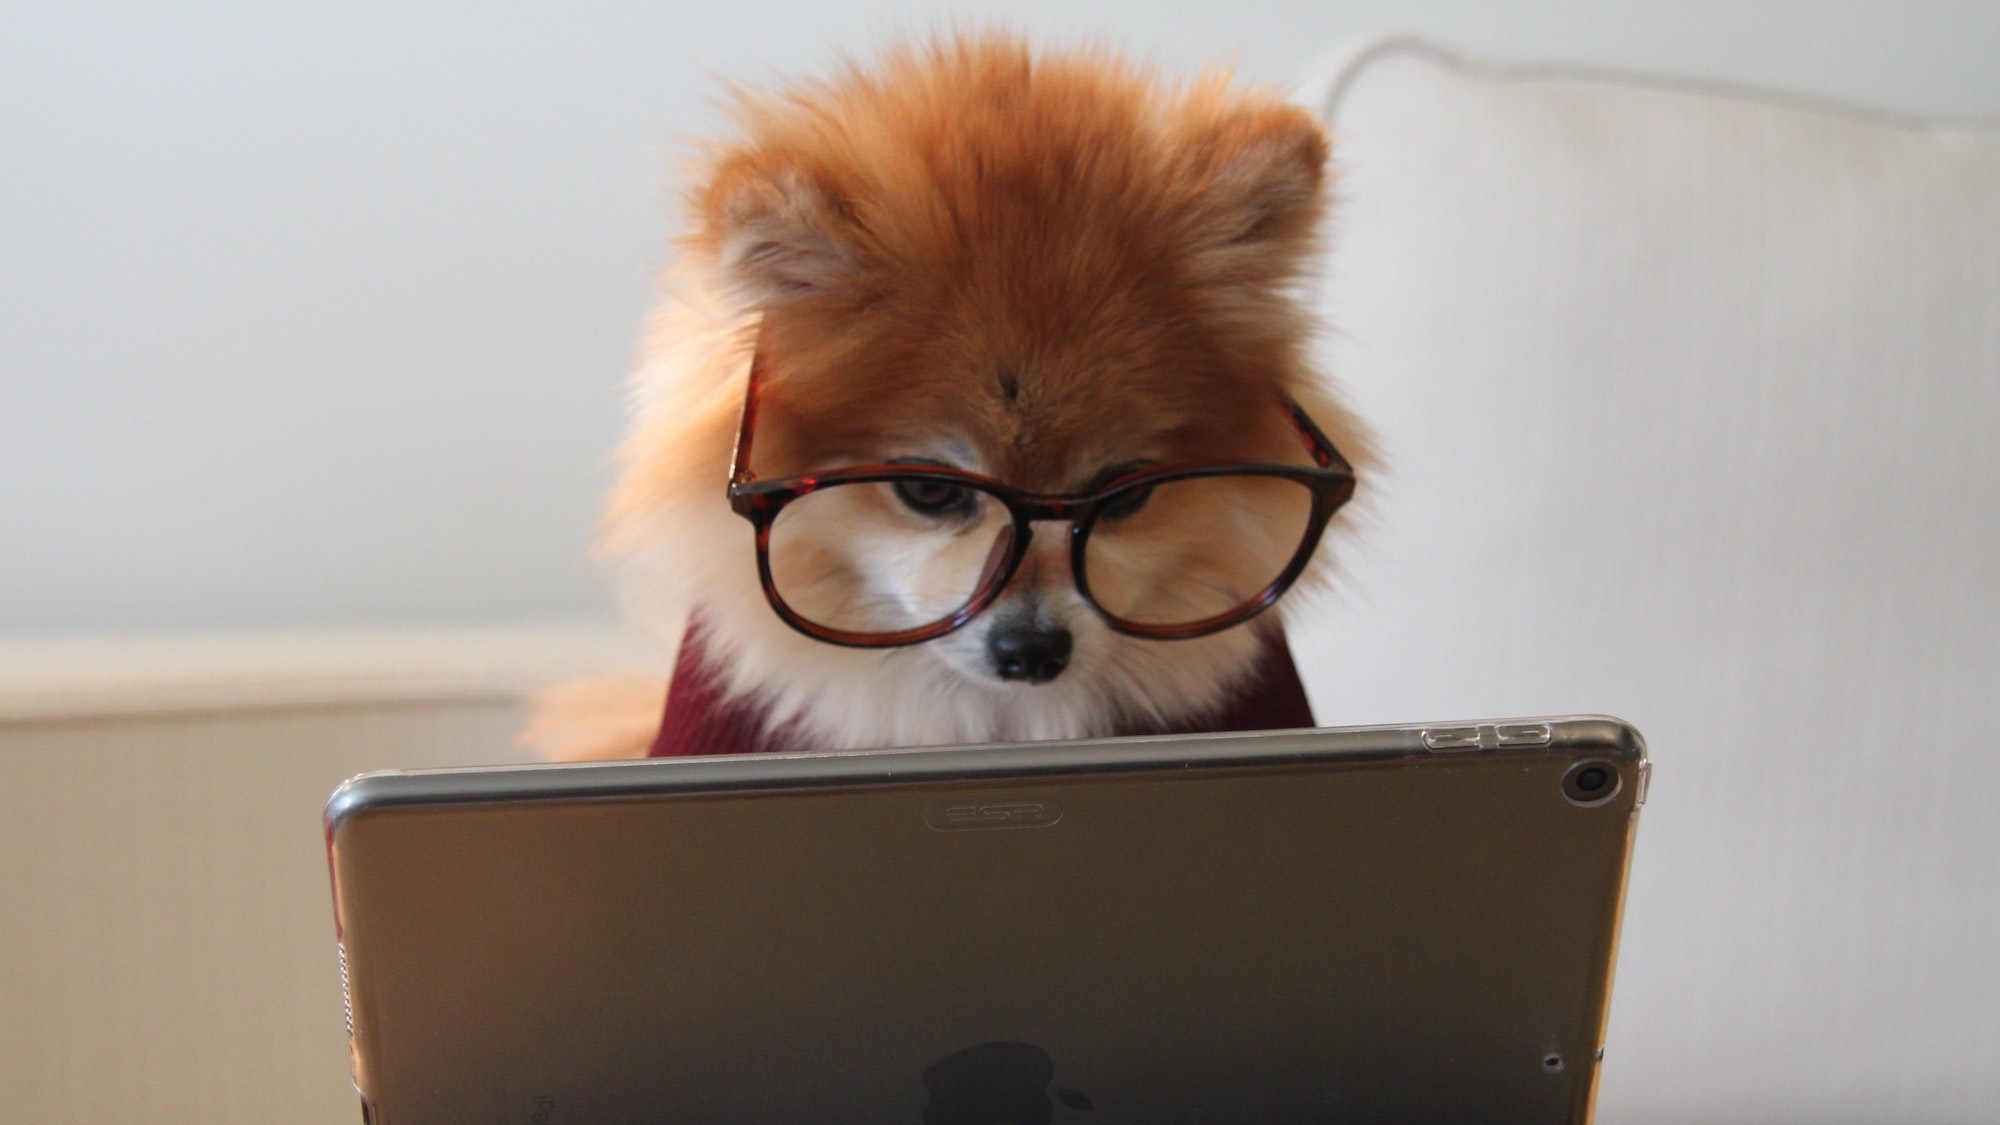 A Pomeranian dog is wearing glasses and looking at a laptop